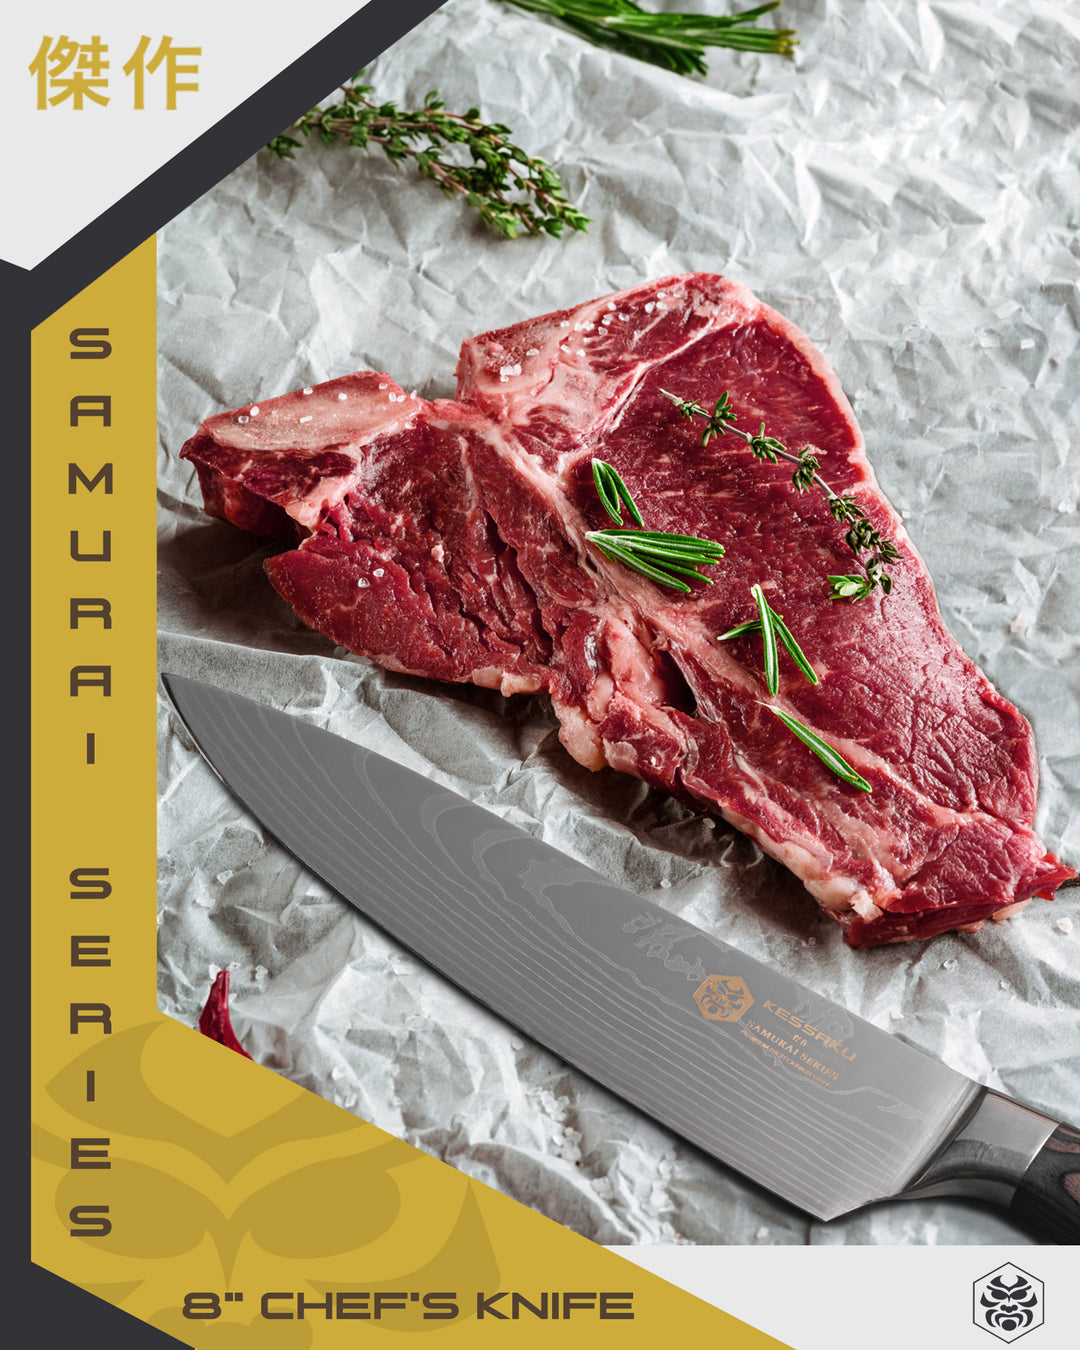 The Samurai Chef Knife used to prep a t-bone steak, with halved hot red pepper, rosemary and sage